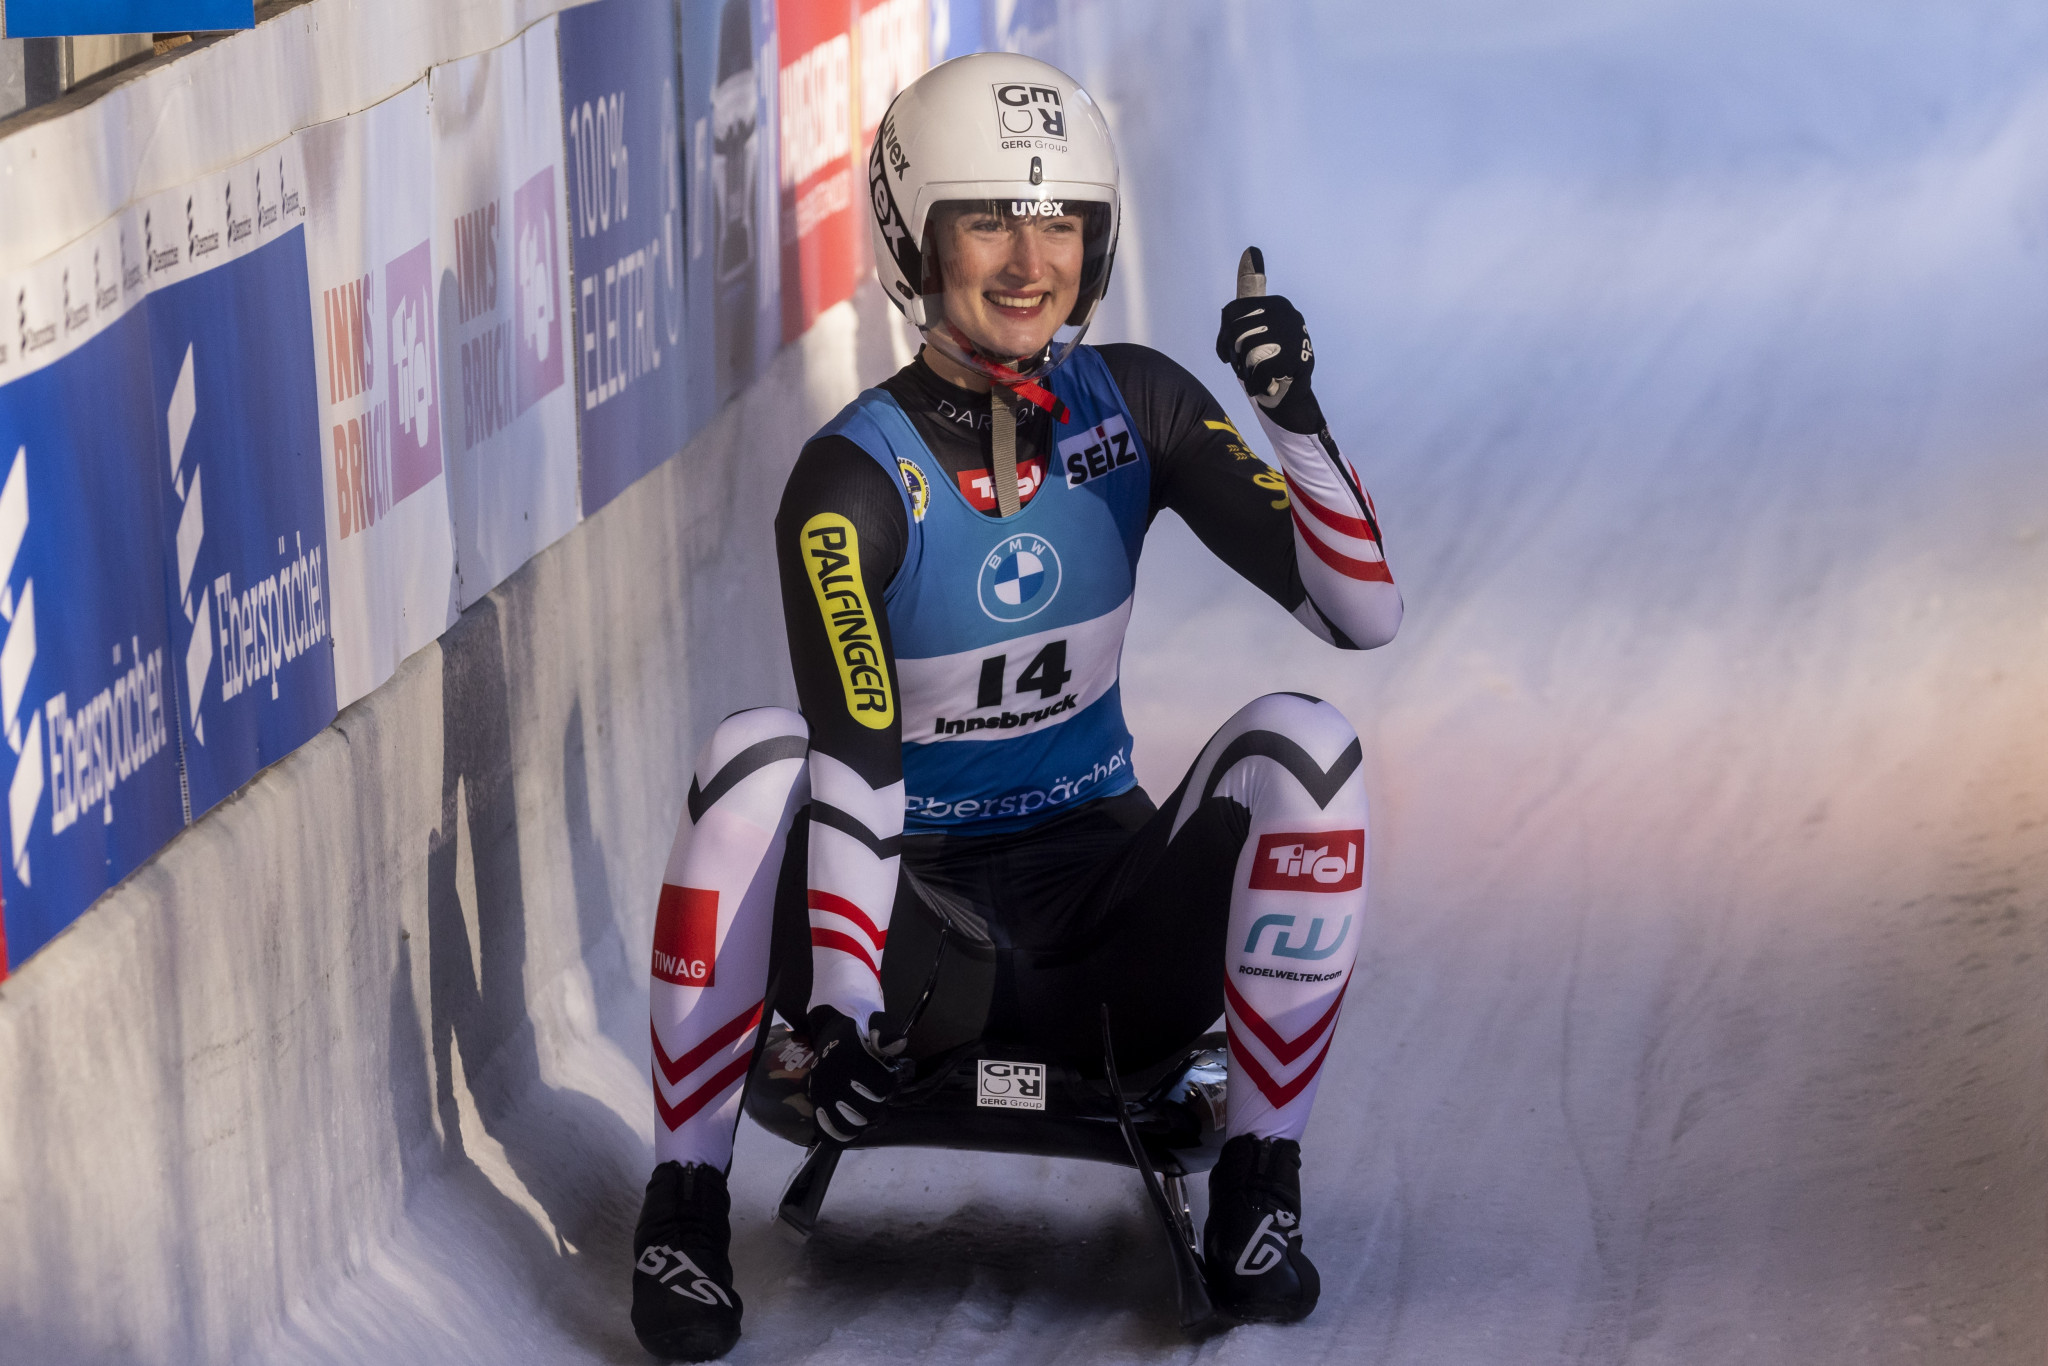 Madeleine Egle is increasing the heat on rival Julia Taubitz as they battle it out for the women's overall Luge World Cup crown ©Getty Images